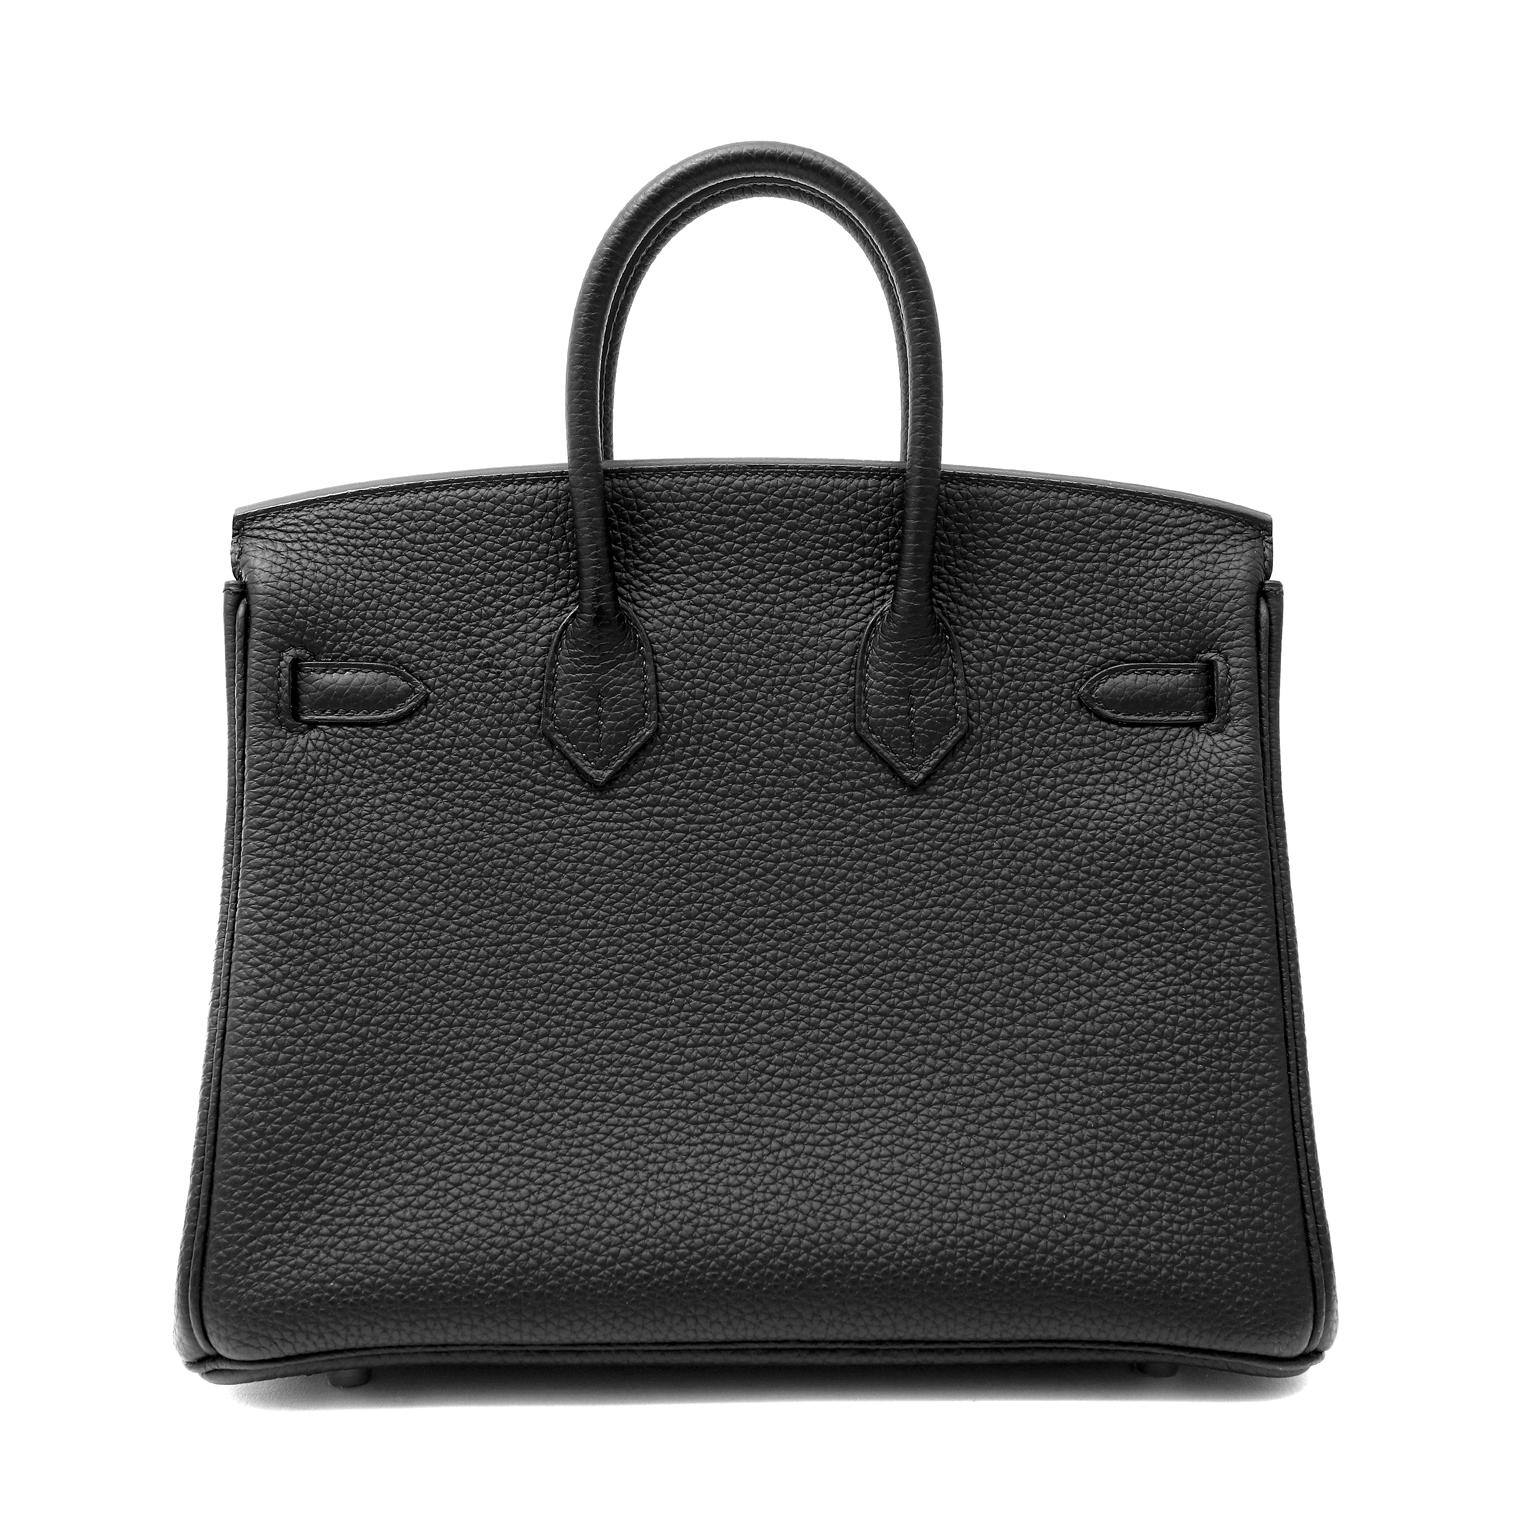 This authentic Hermès Black Togo 25 cm Birkin is in pristine condition with the protective plastic intact on the hardware.  The smaller silhouette of the Birkin is demure and ladylike.  It is in extremely high demand.
Black Togo leather is textured